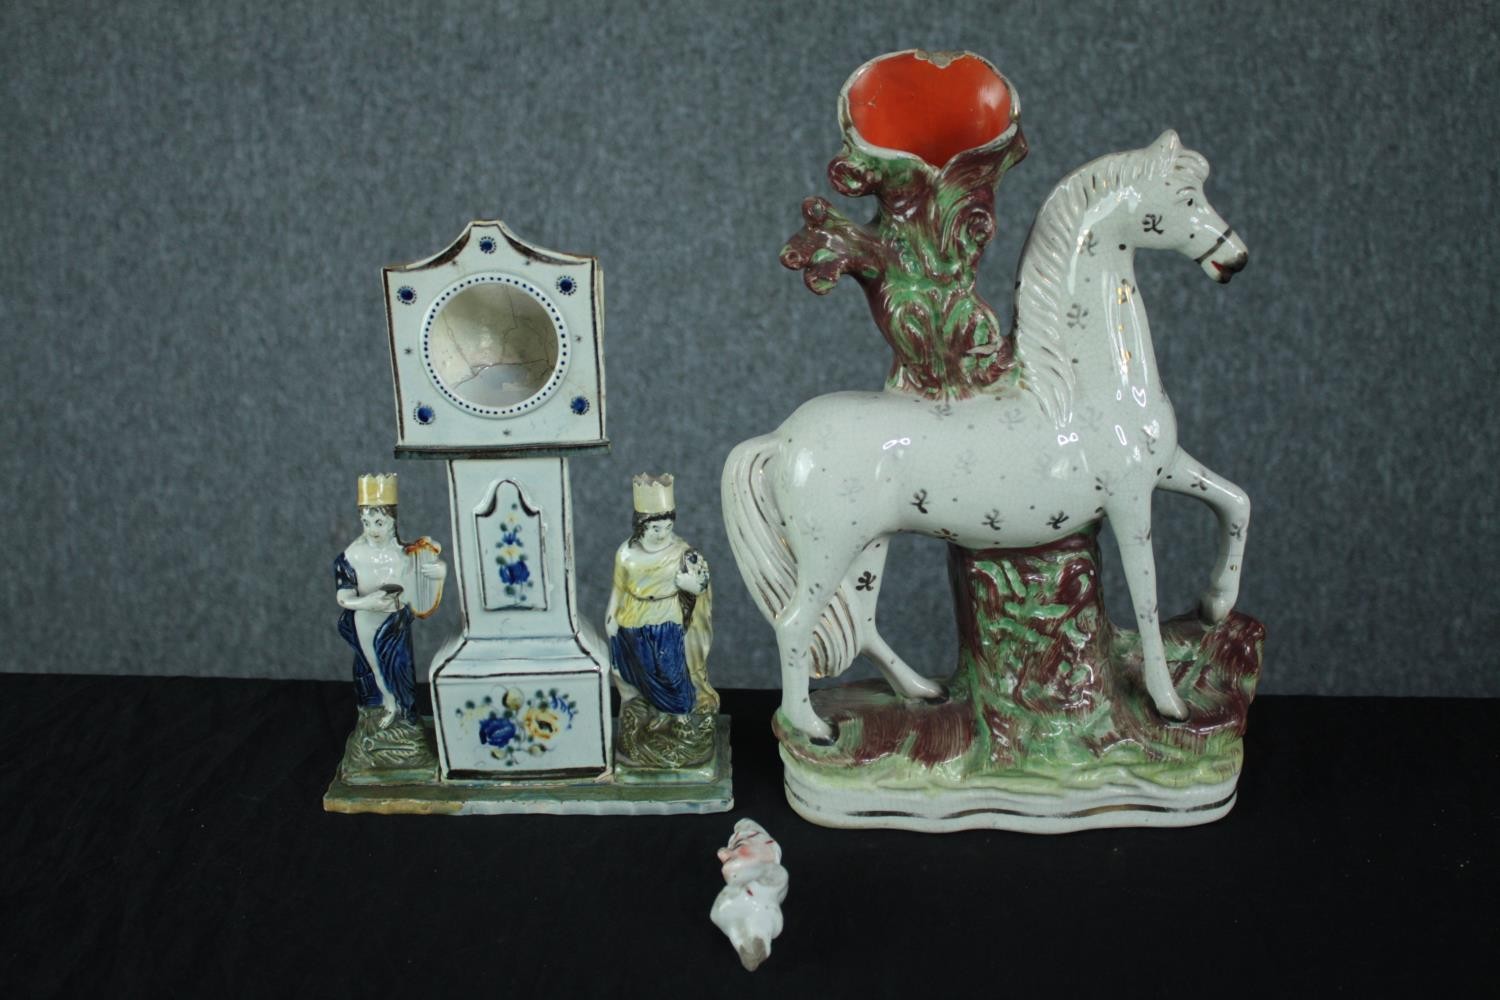 Staffordshire porcelain figures. A candleholder in the shape of a horse, a grandfather clock